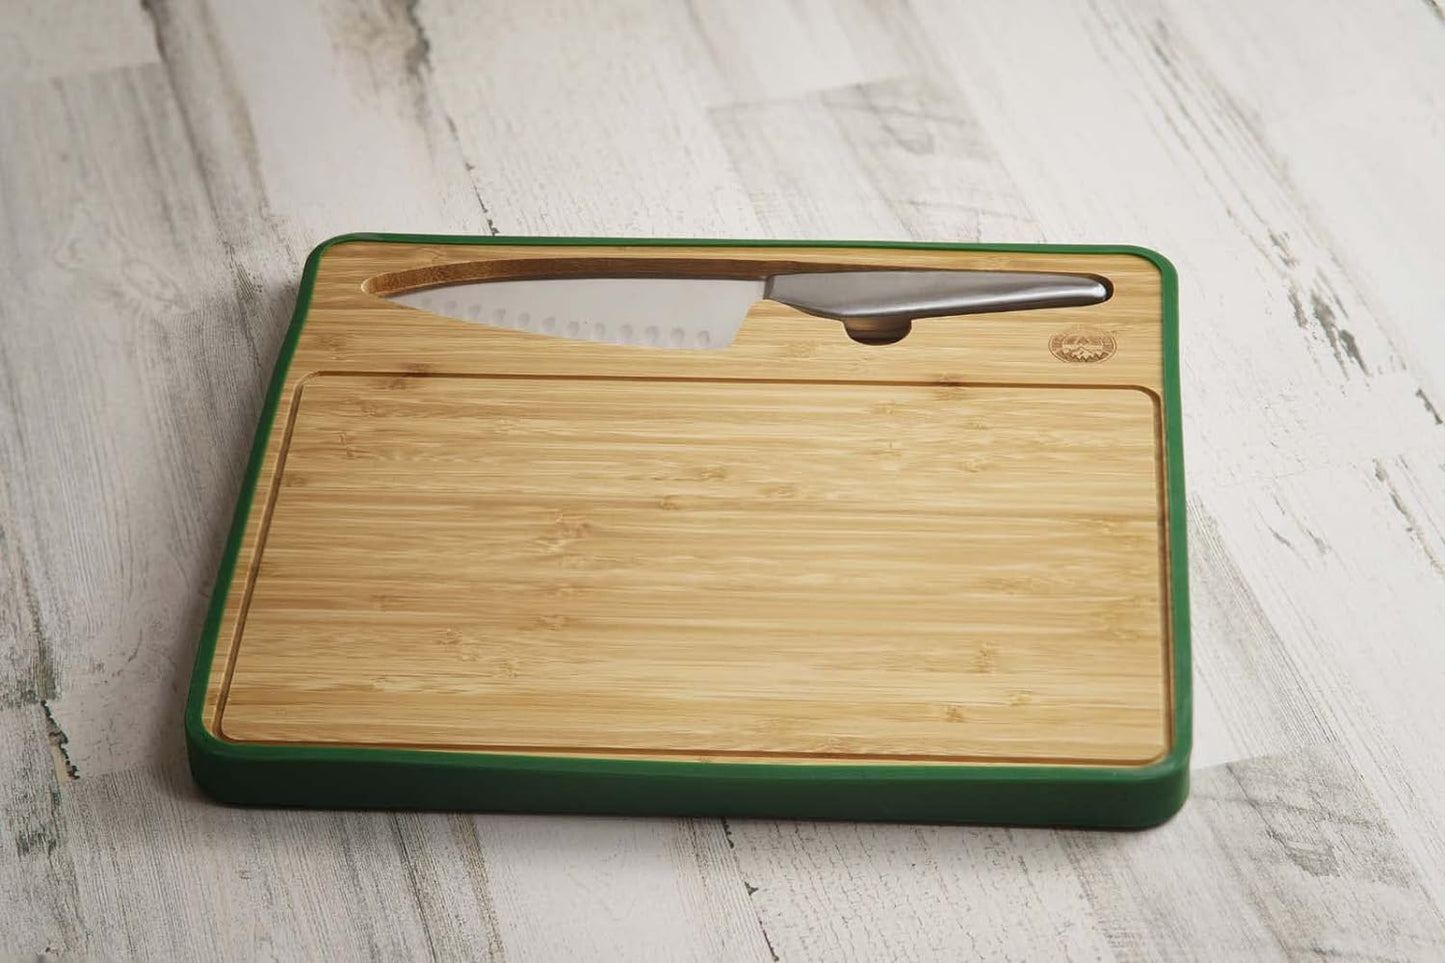 Switchback Travel Cutting Board | 13" x 12" Bamboo Cutting Board | Included Chef's Knife, Silicone Travel Cover | Perfect For RV'ing